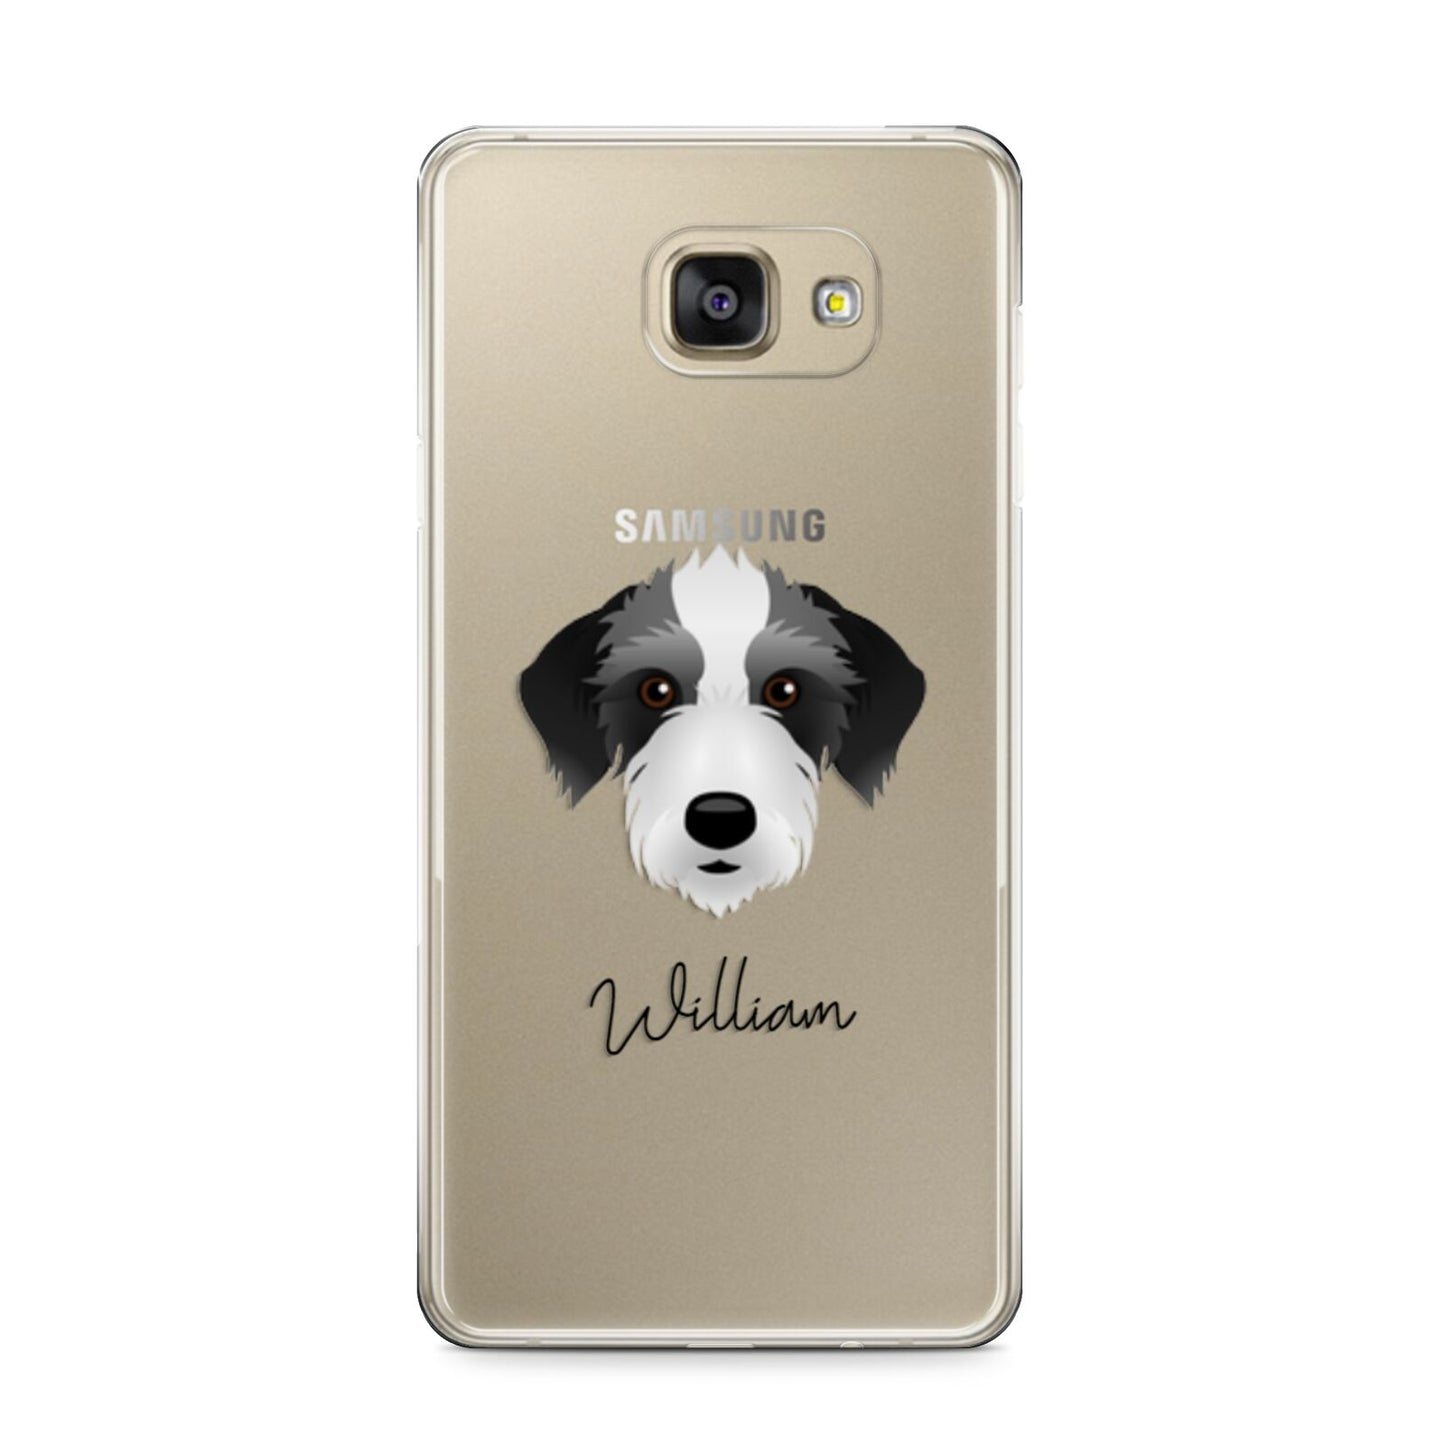 Bedlington Whippet Personalised Samsung Galaxy A9 2016 Case on gold phone